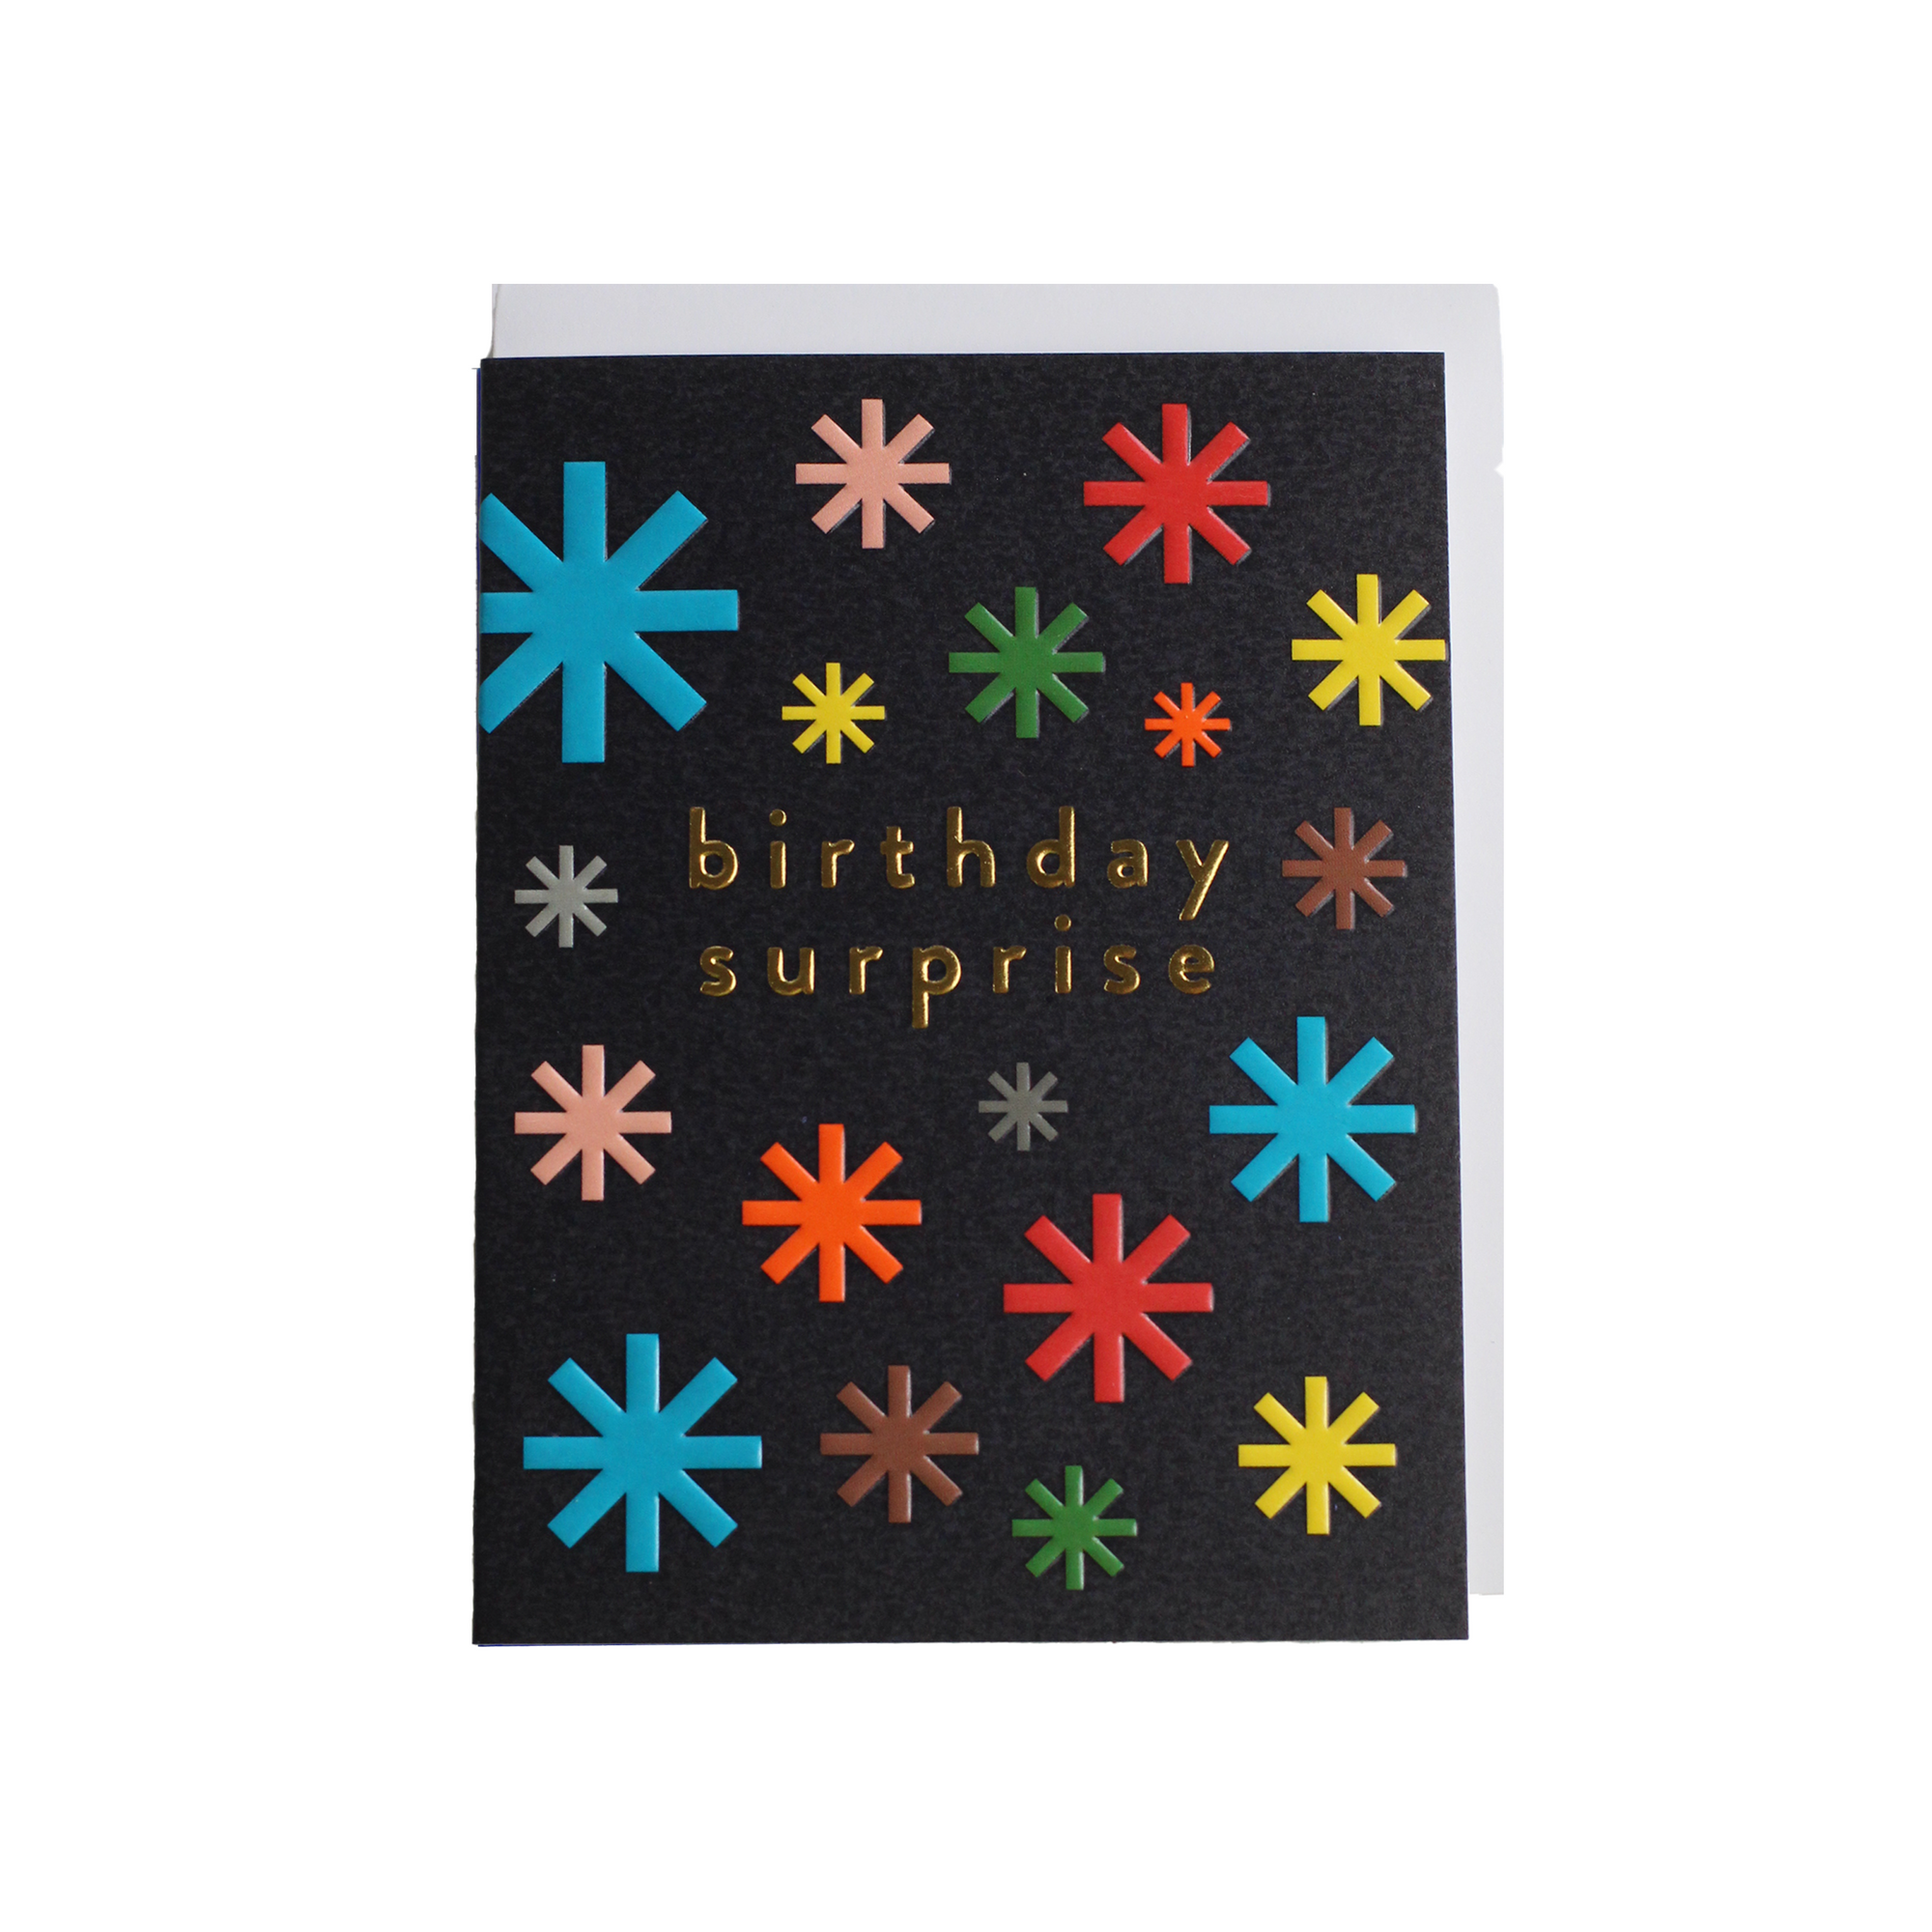 Greeting card with "birthday surprise" text, comes with envelope.